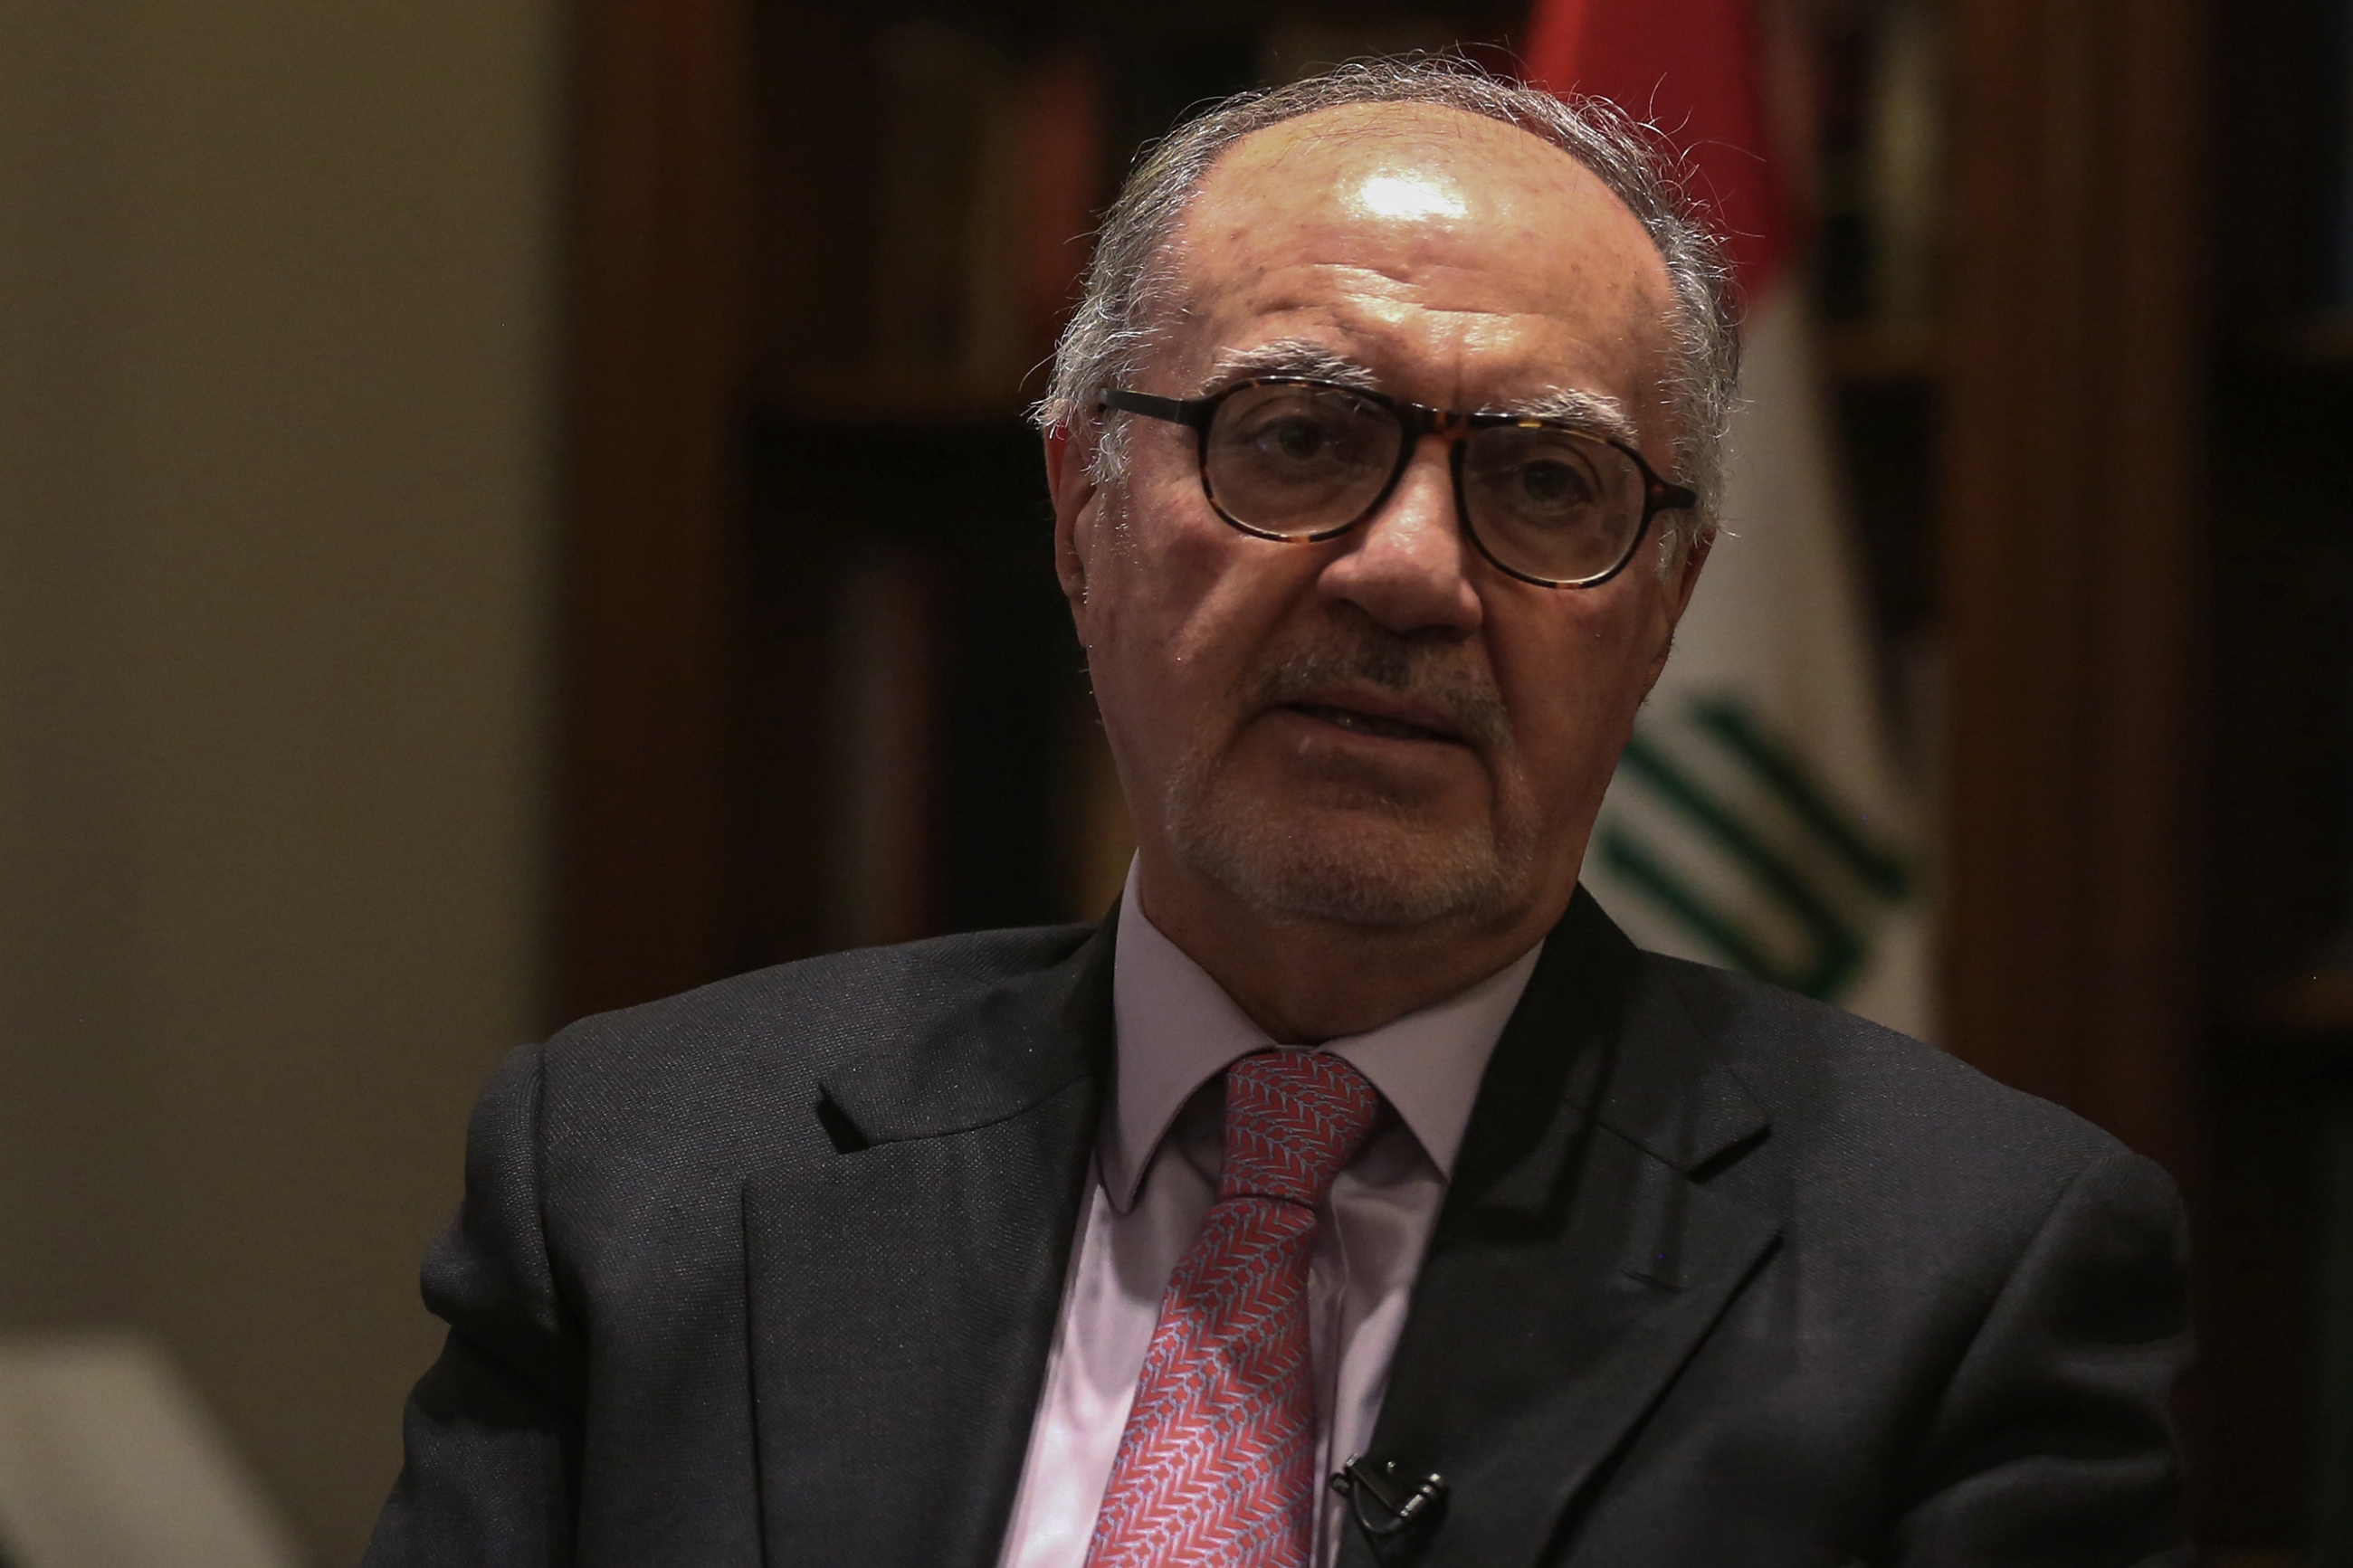 Ali Allawi serves as both Iraq's deputy prime minister and minister of finance.